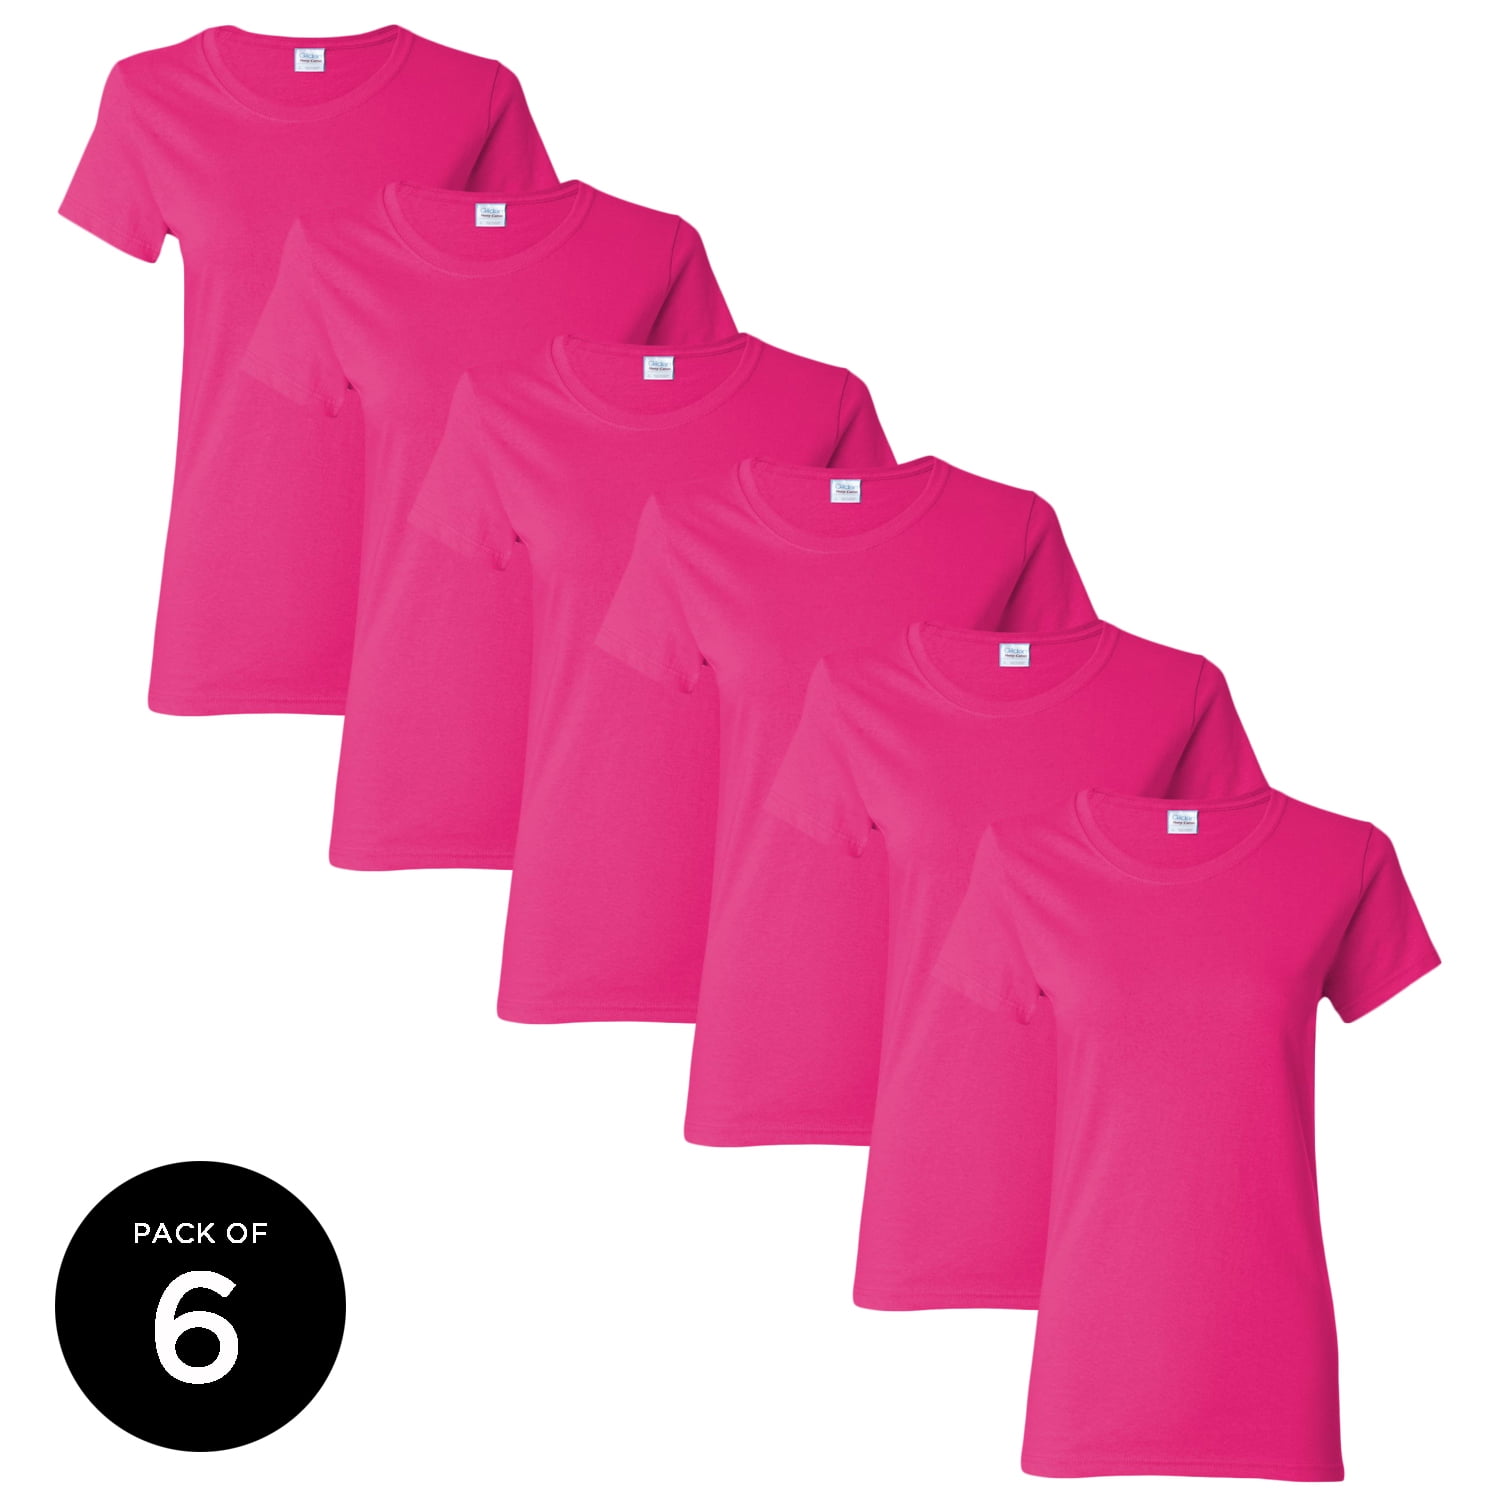 Gildan Women Pink T-Shirts Value Pack Shirts for Women - Single OR Pack of  6 OR Pack of 12 Cute Casual Plain Pink Shirts for Women Gildan T-shirts for